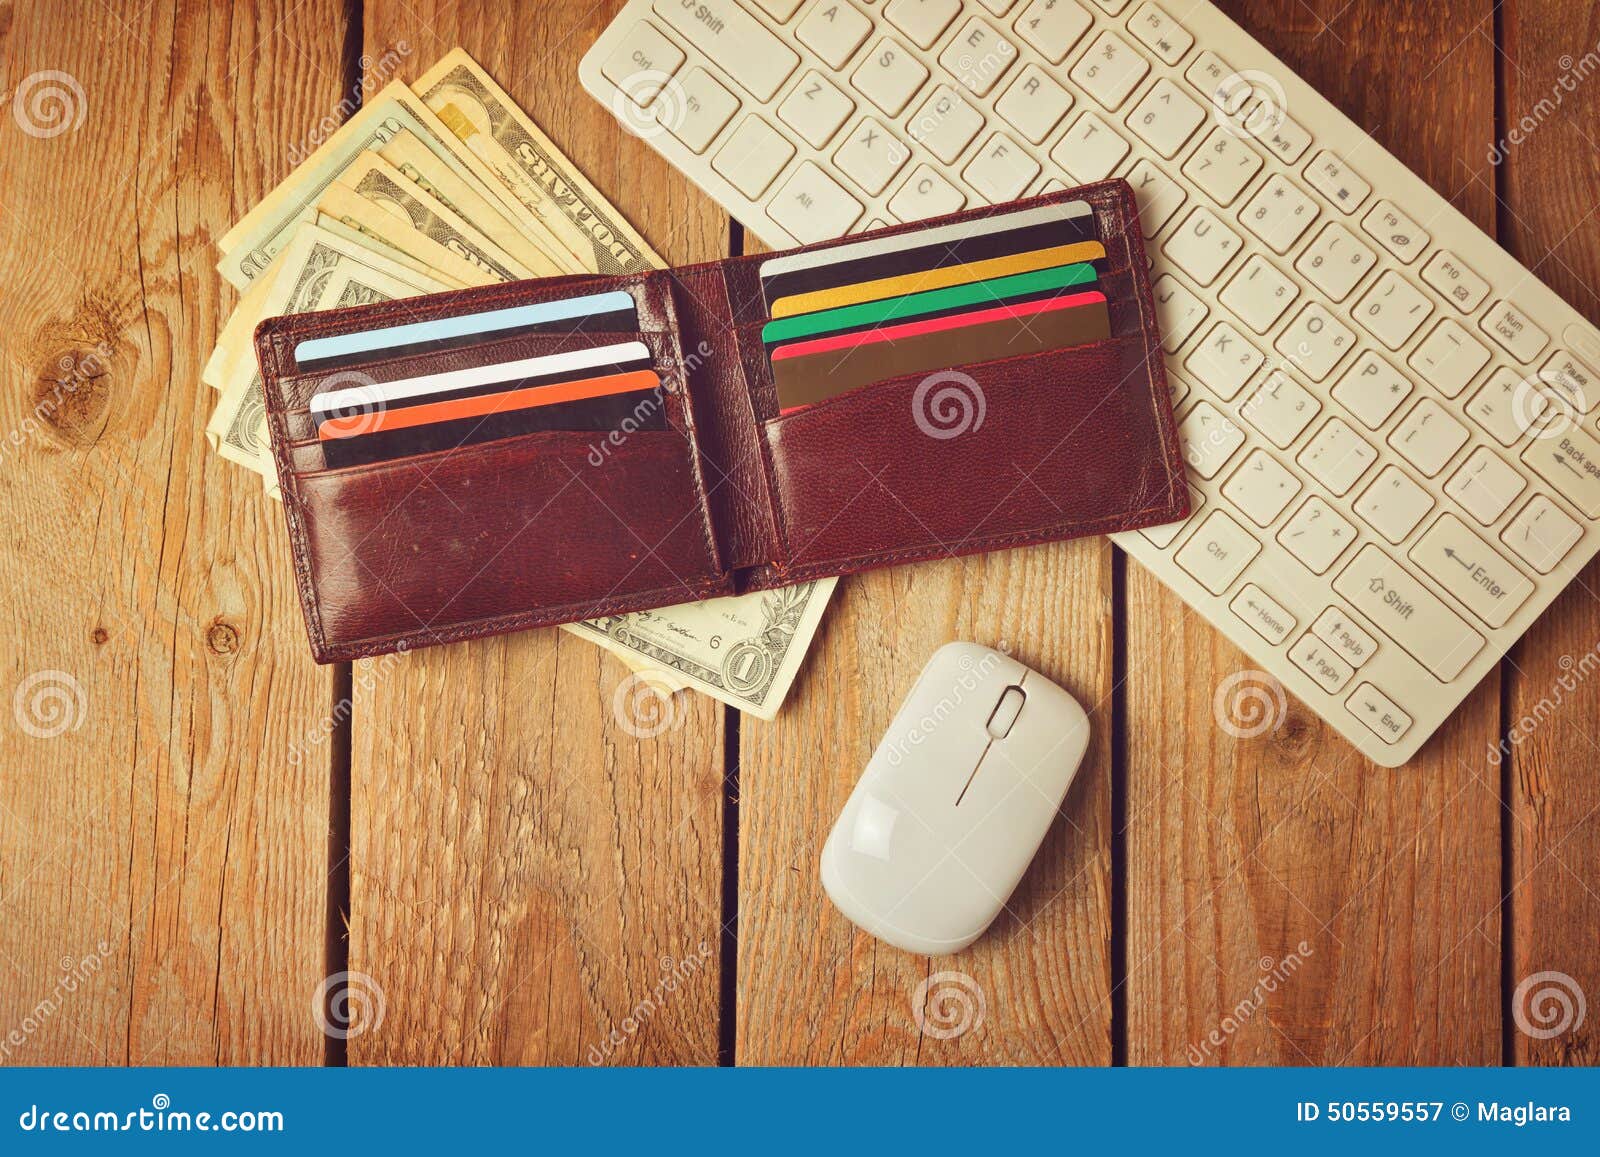 online shopping concept with wallet, money and keyboard. retro filter effect